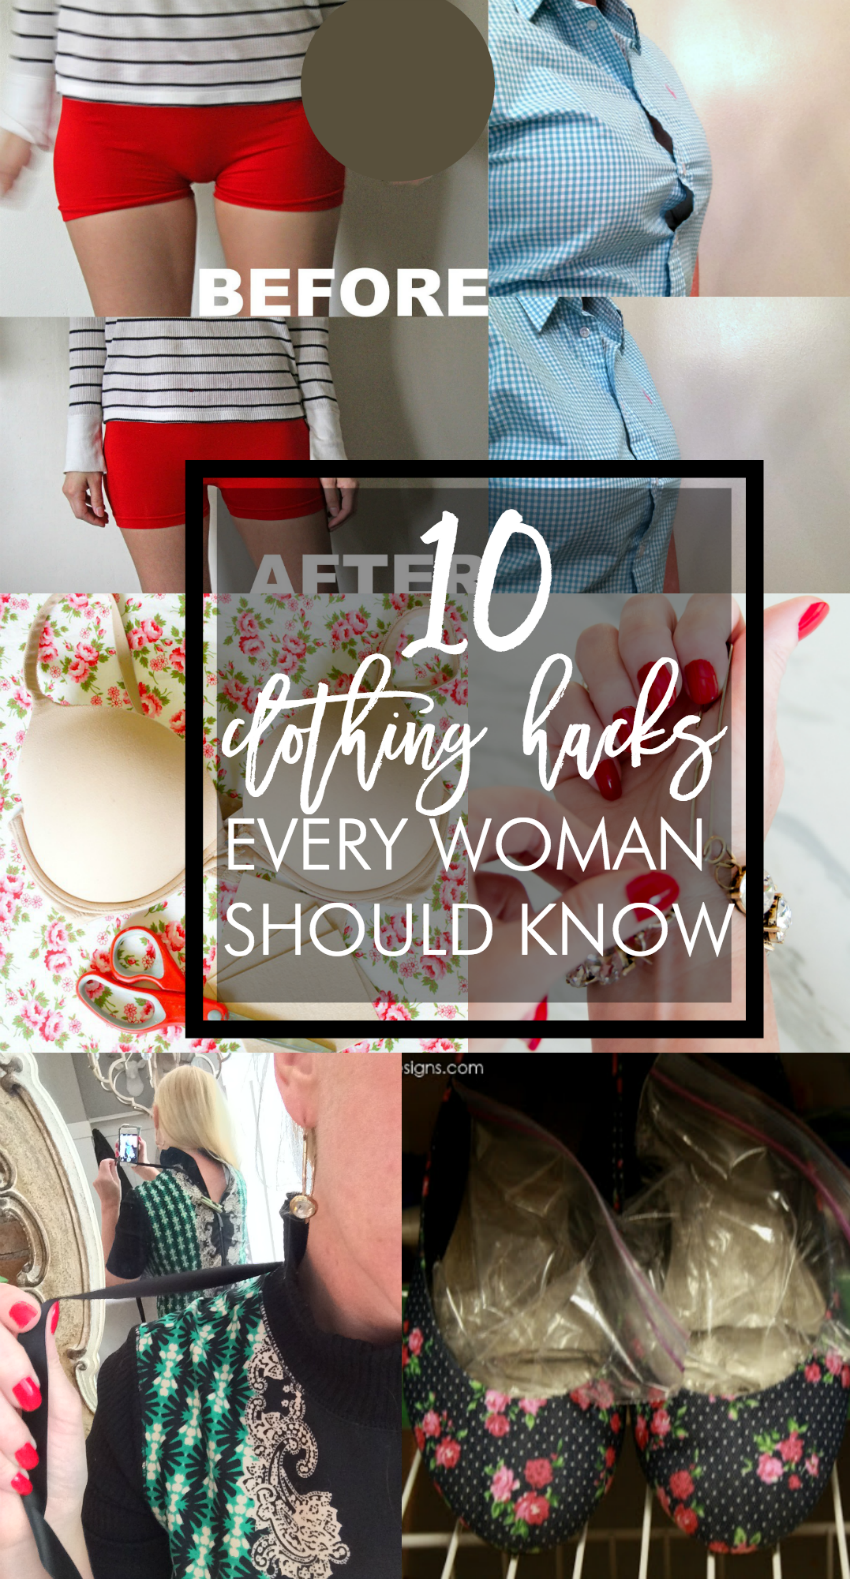 Great tips! Ten clothing hacks every woman should know